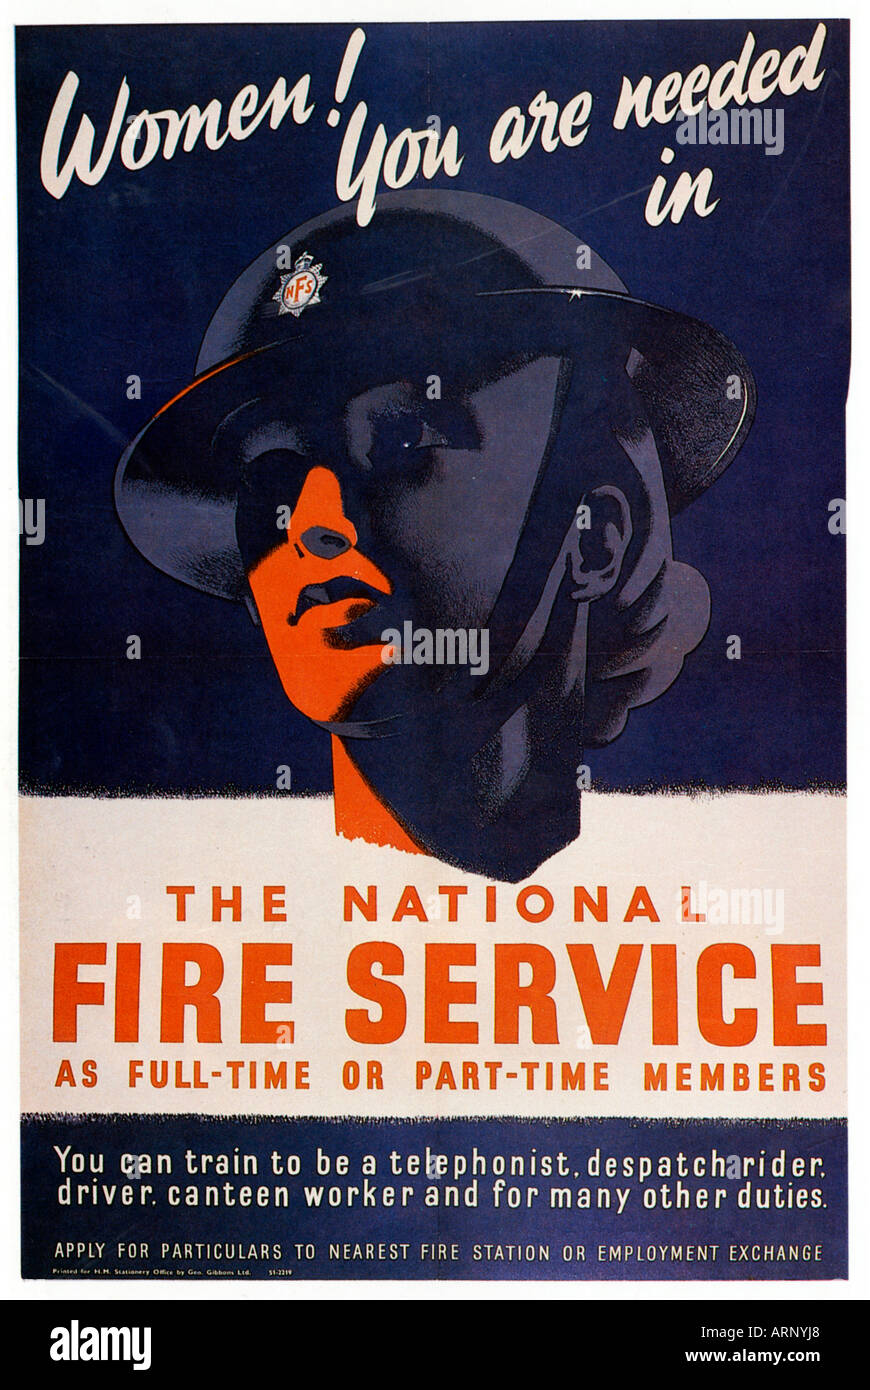 Women Needed Poster 1940 English Fire Service recruitment poster Stock Photo